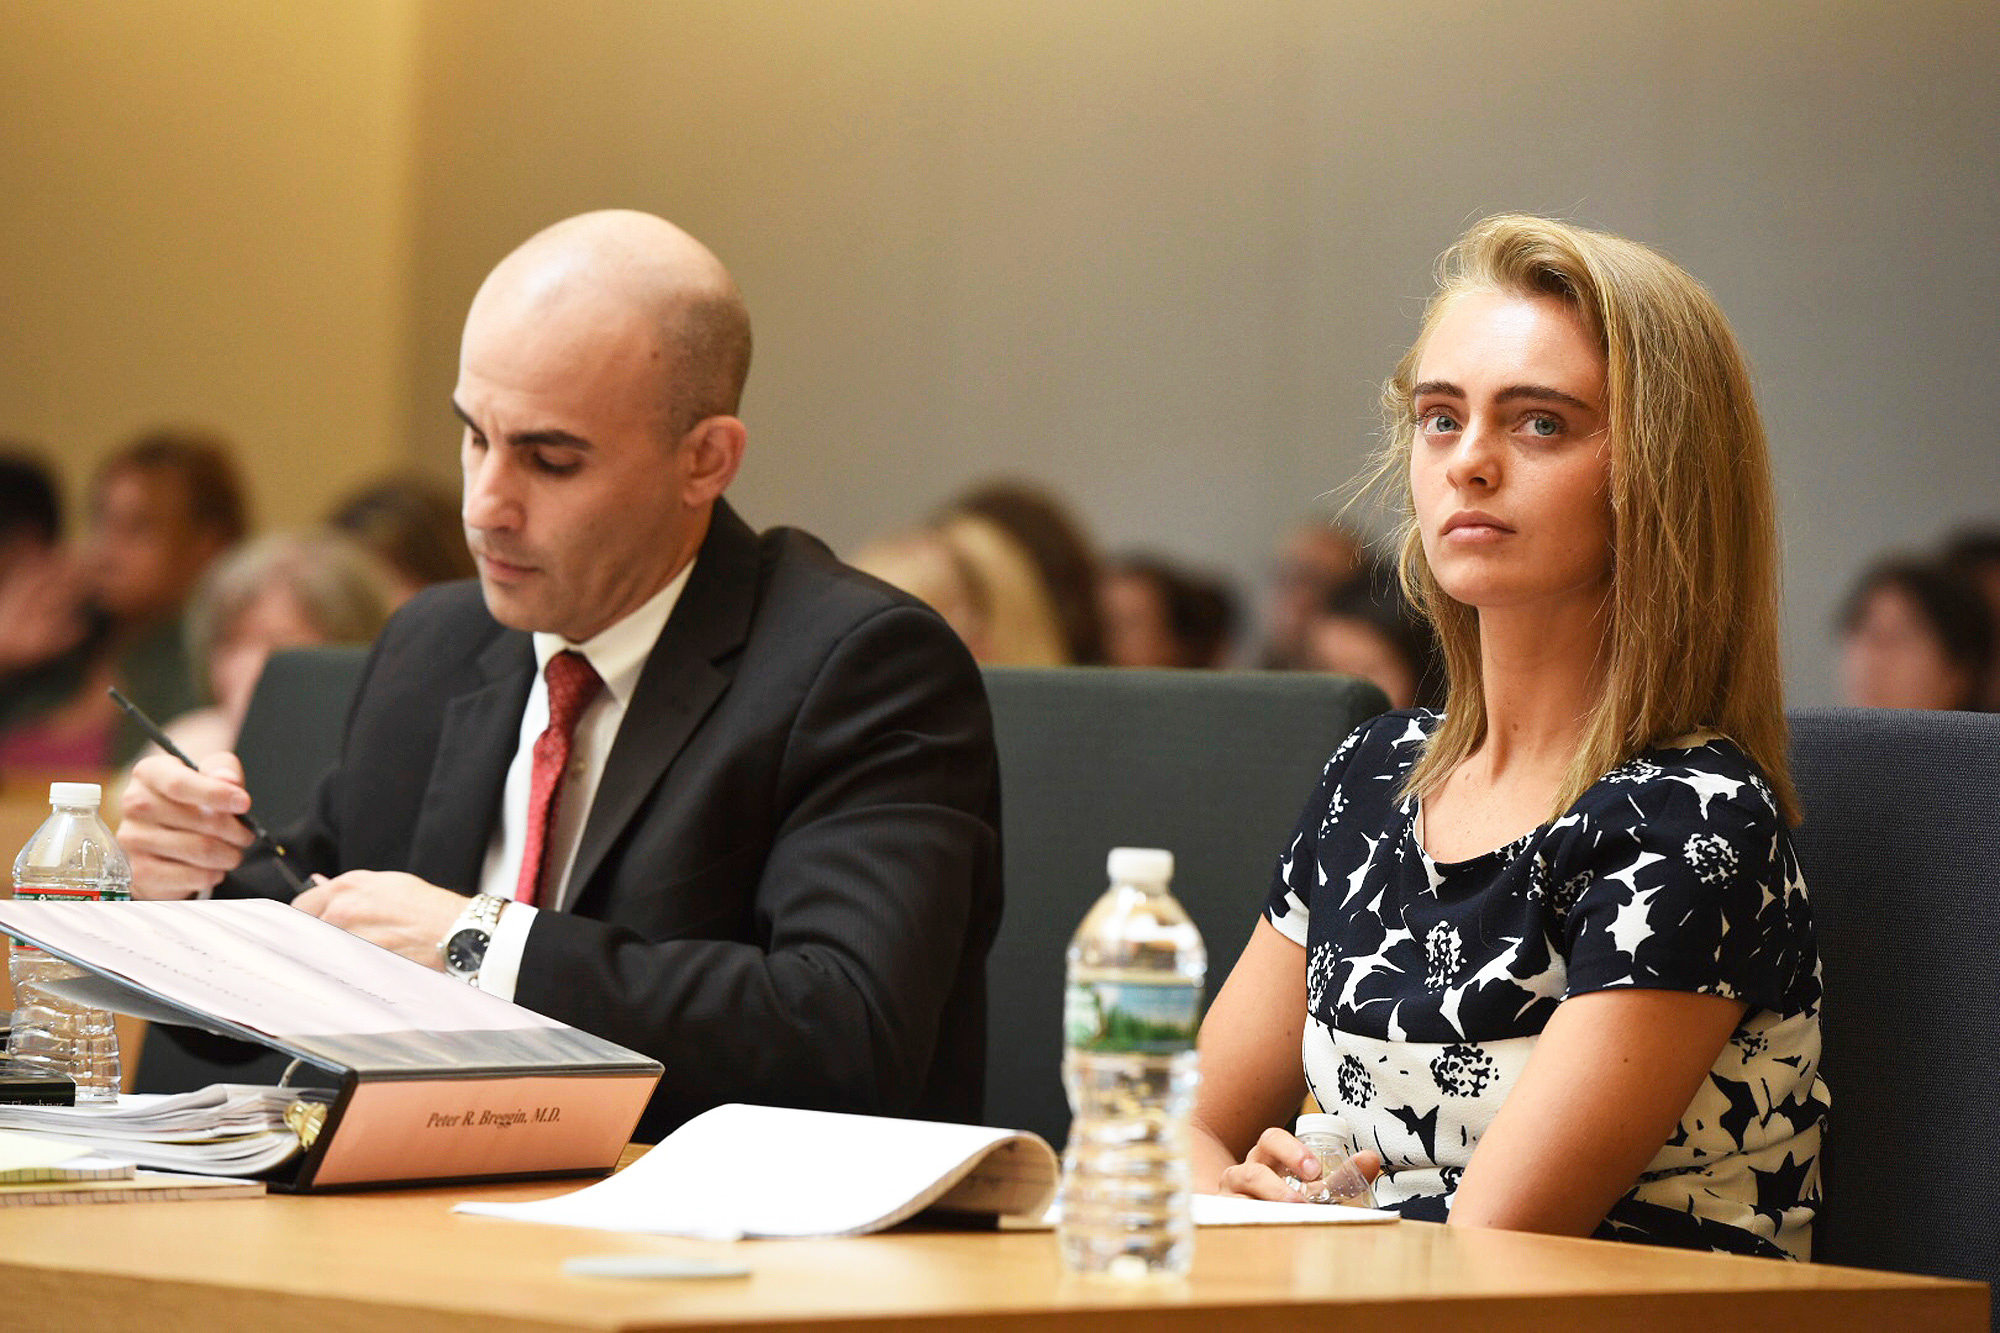 Michelle Carter’s Actions Are Heinous, But They Are Not Crimes